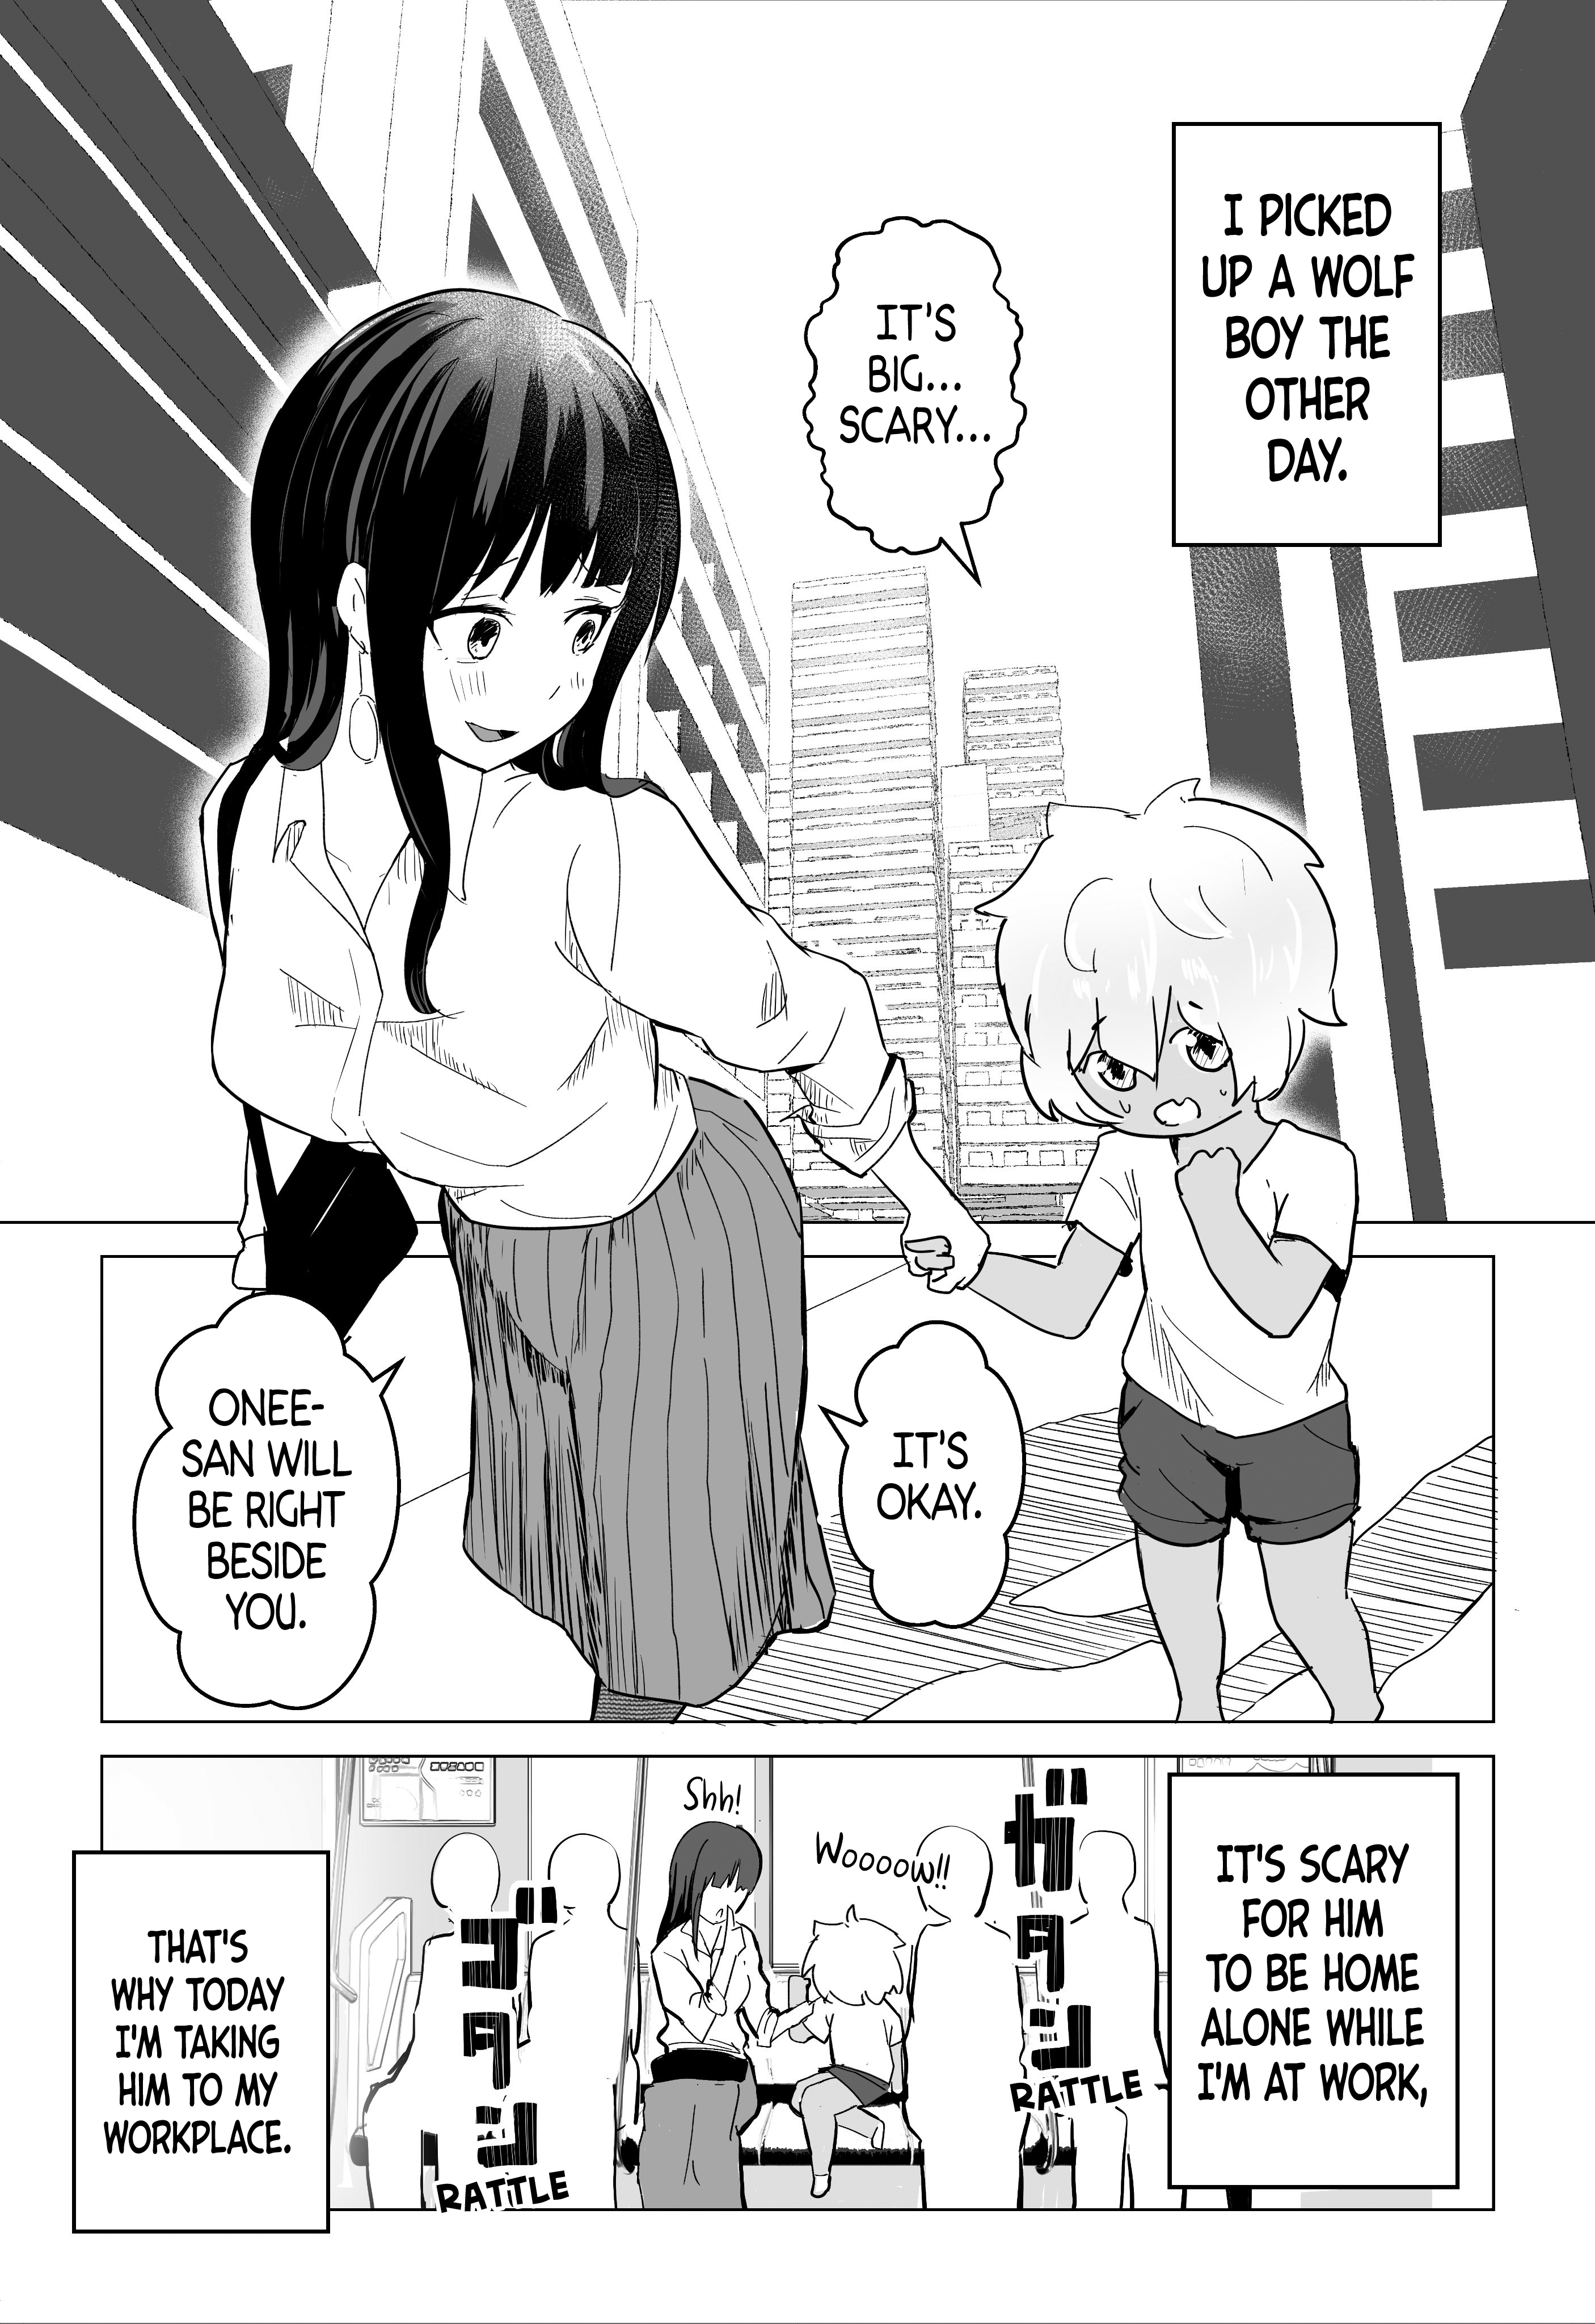 The Office-Lady Who Took In A Wild Shota - Page 1